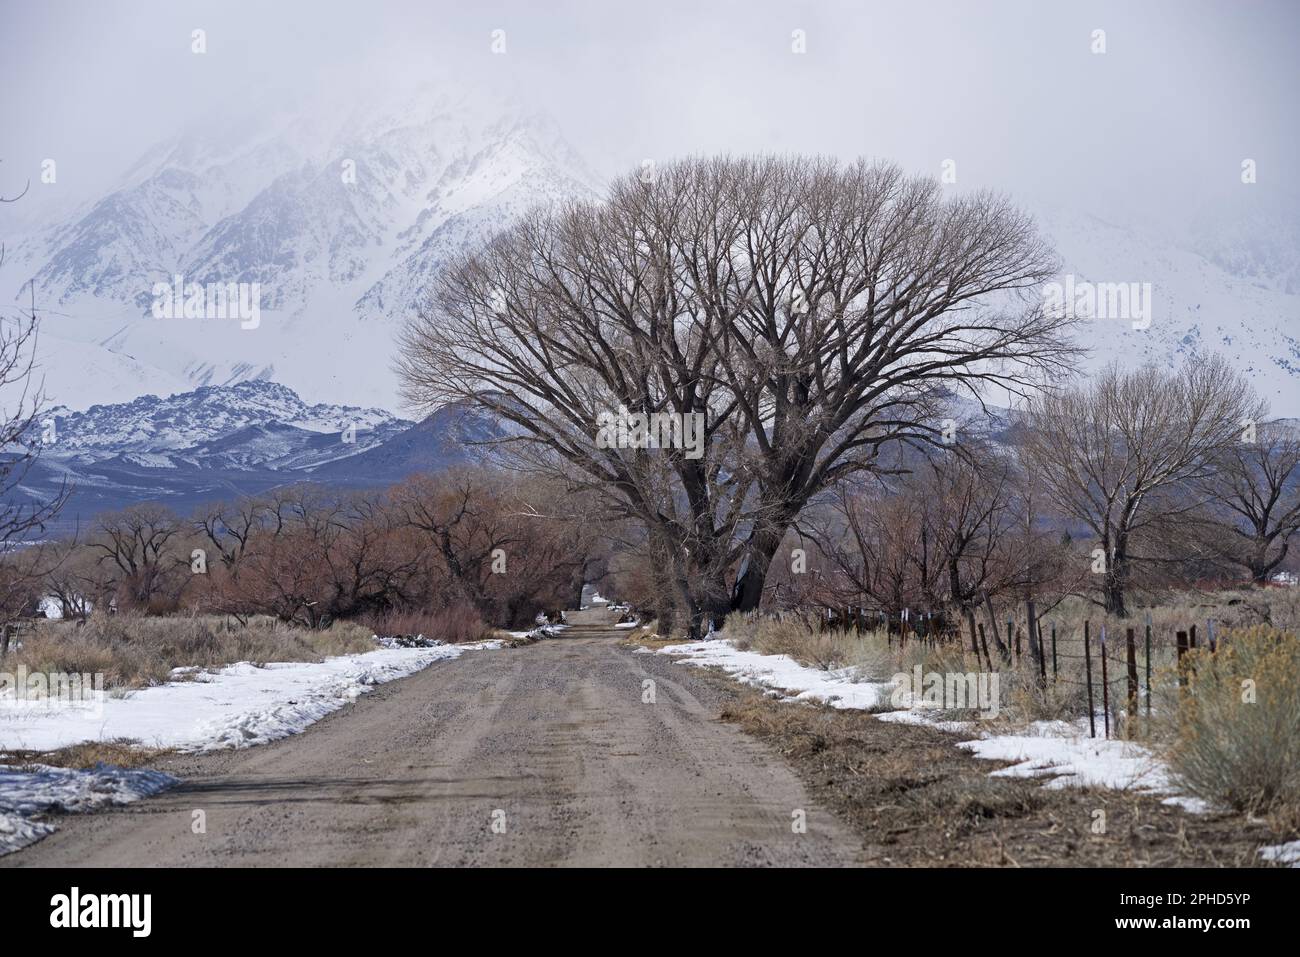 Owens Valley country road in the winter leading past bare trees up towards snowy mountains Stock Photo